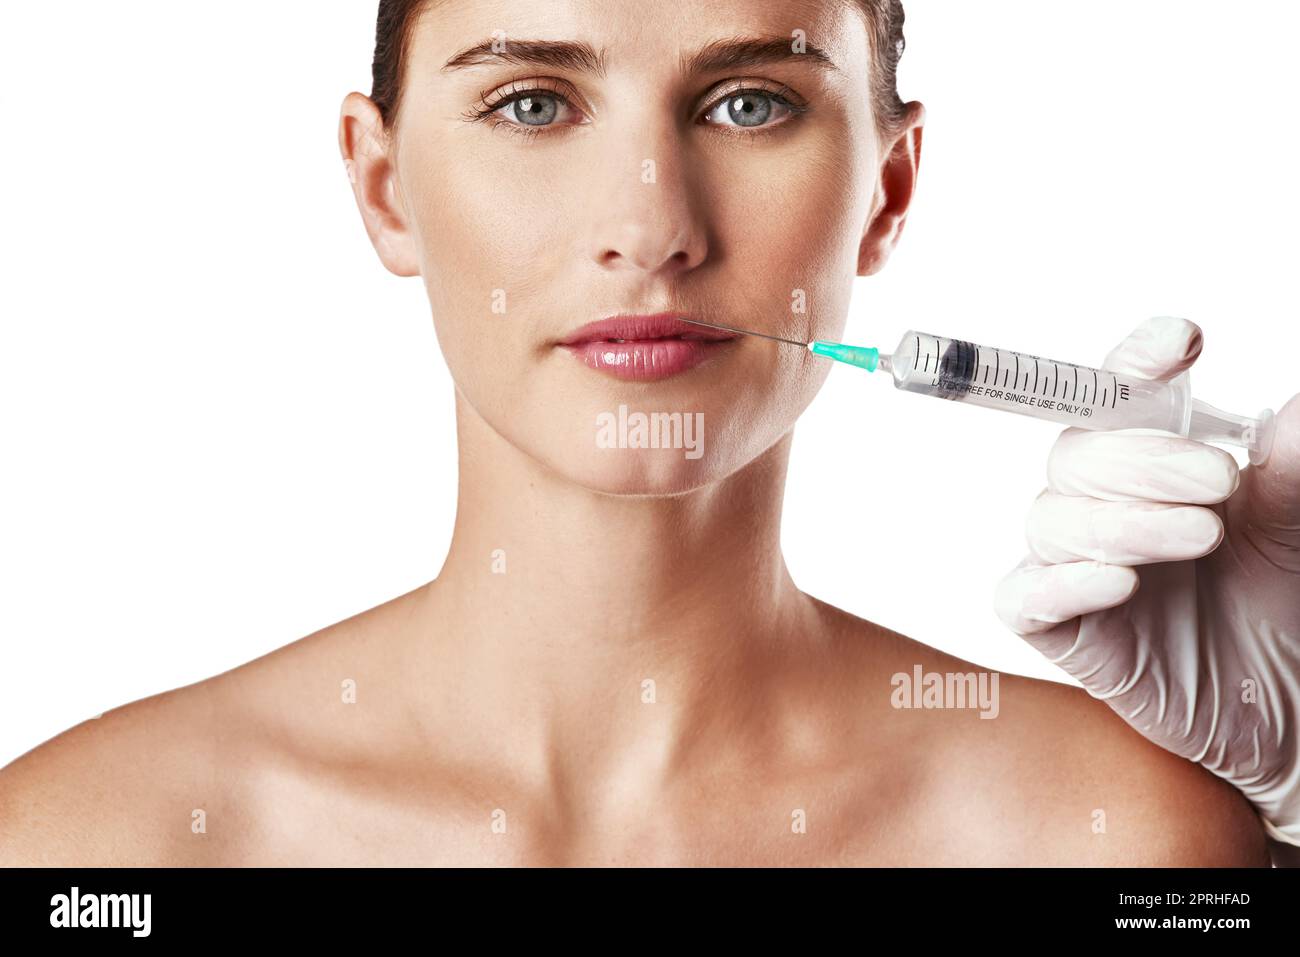 Winning the war against age. Studio shot of an attractive young woman getting an injection for cosmetic purposes. Stock Photo